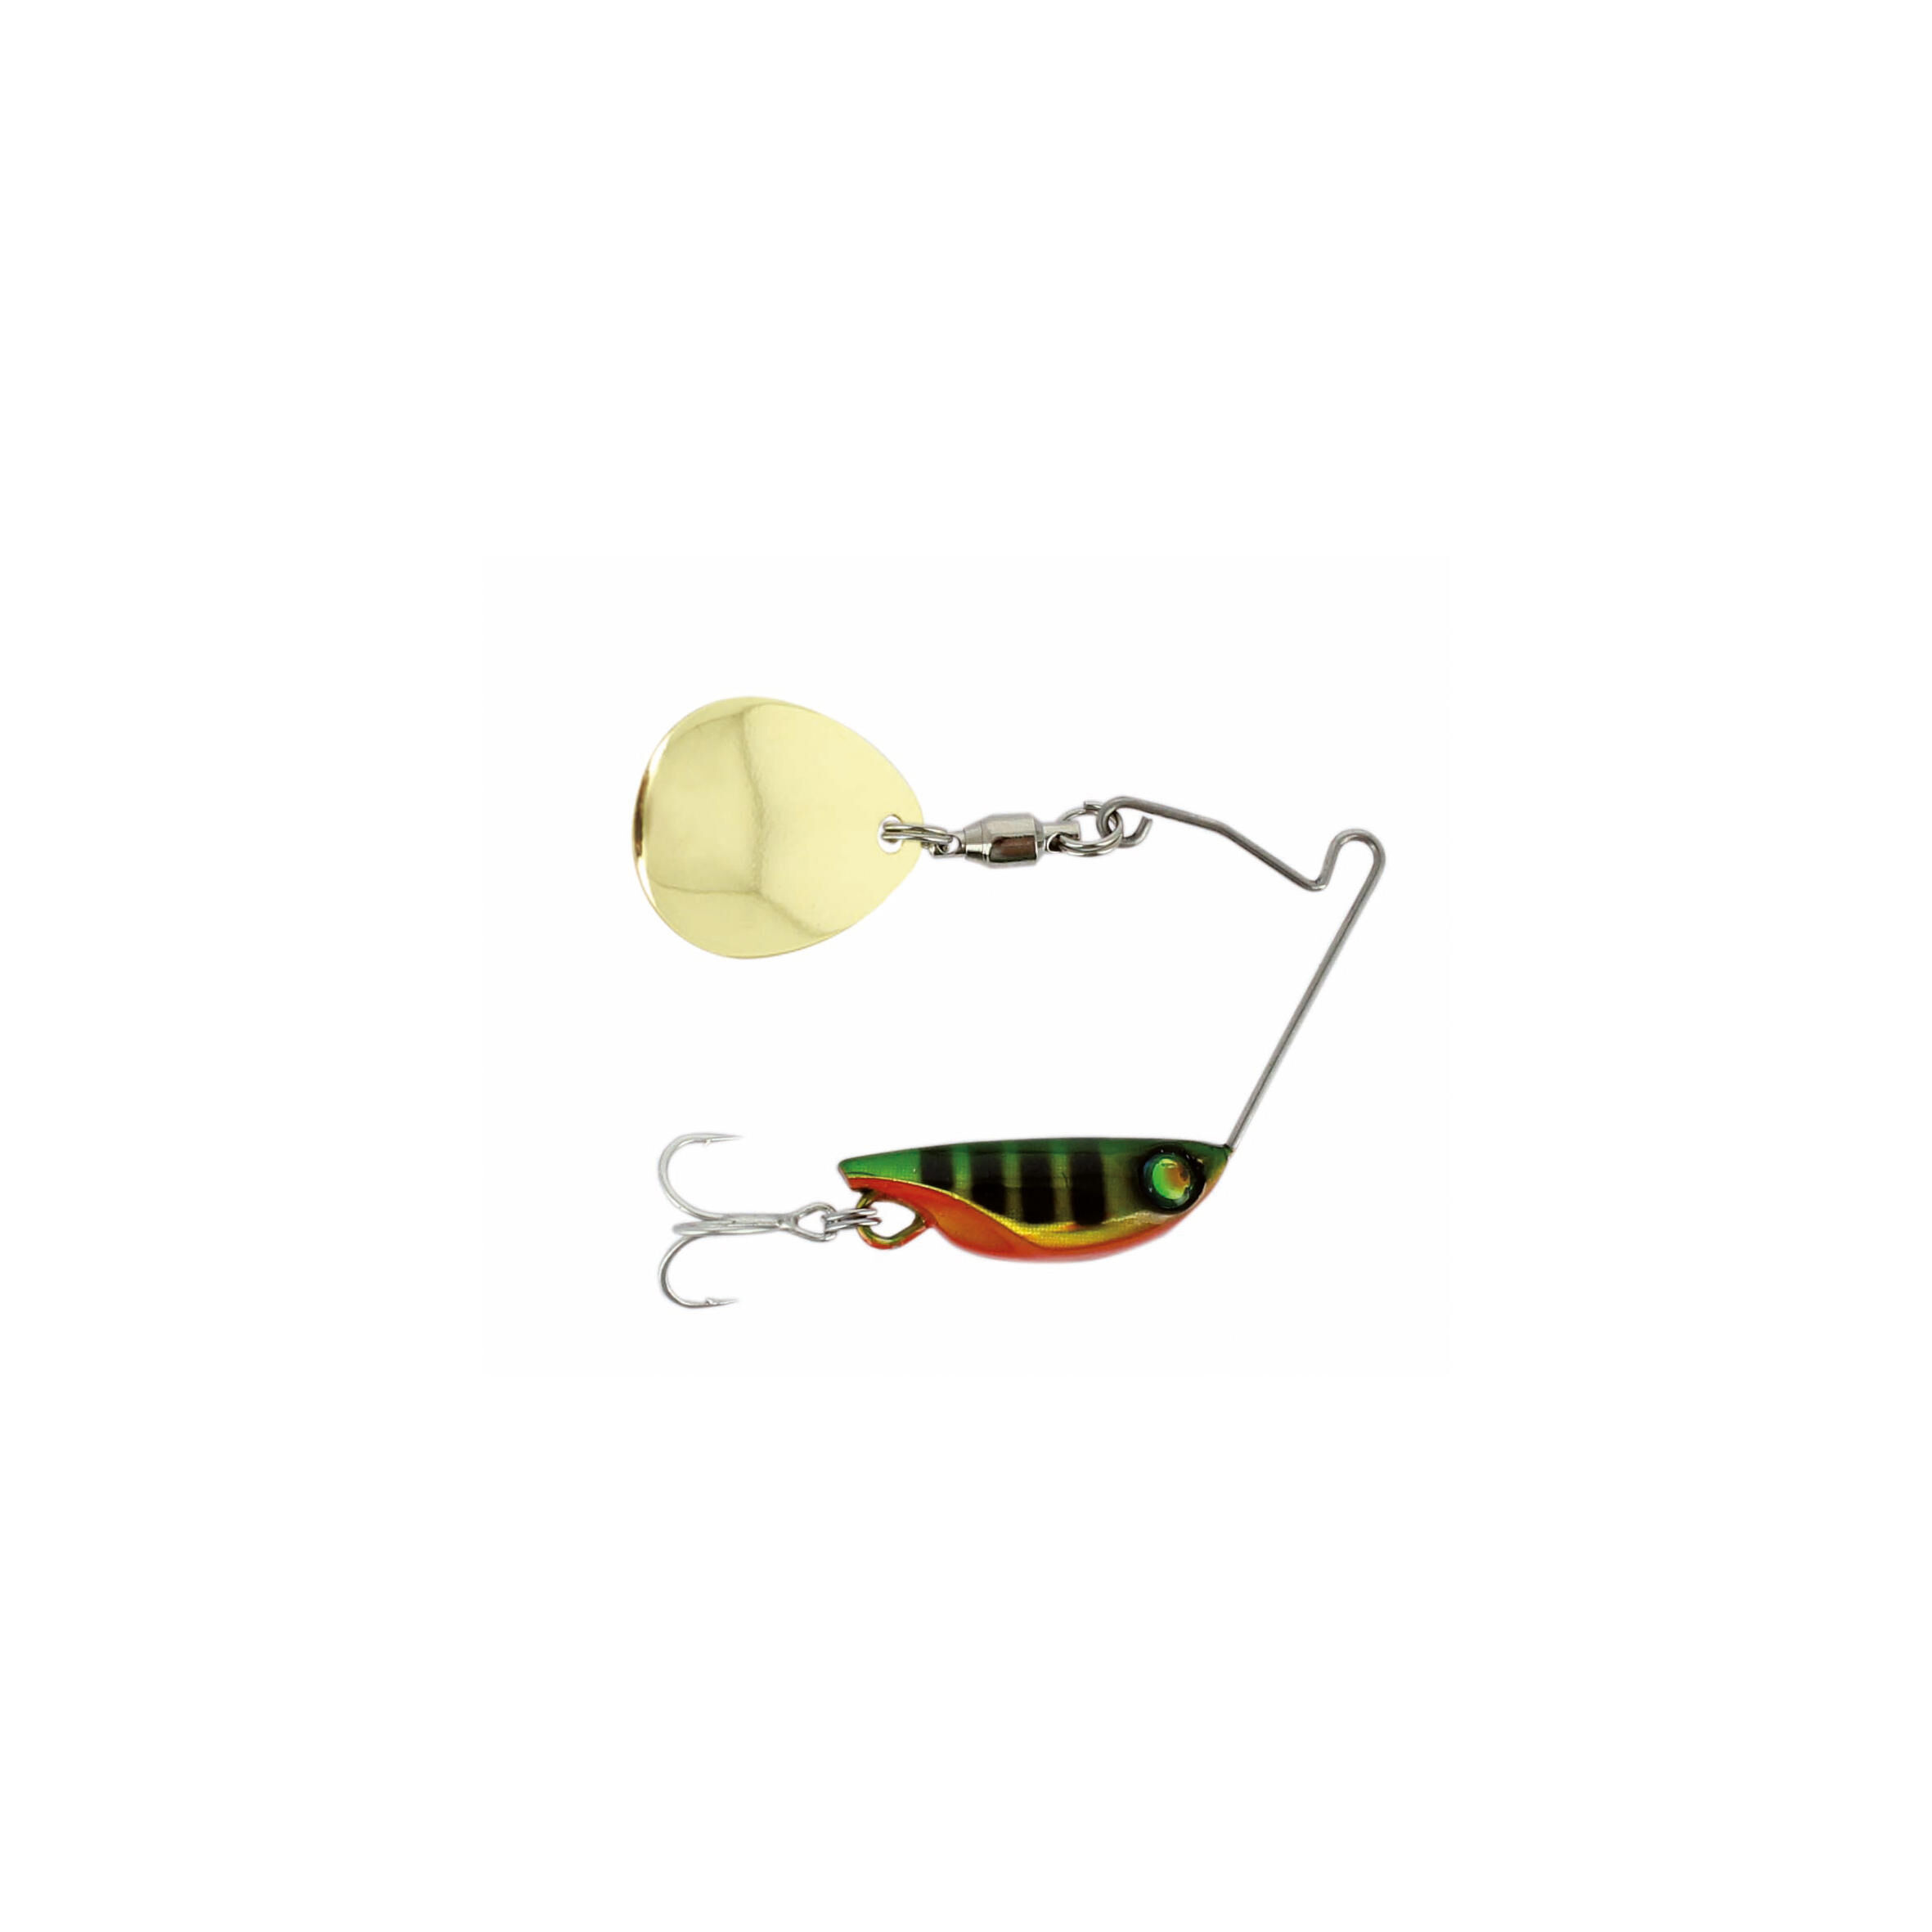 AUTAIN Perch Lure Fishing Spinner Microspinner Nano'x 6g Perch